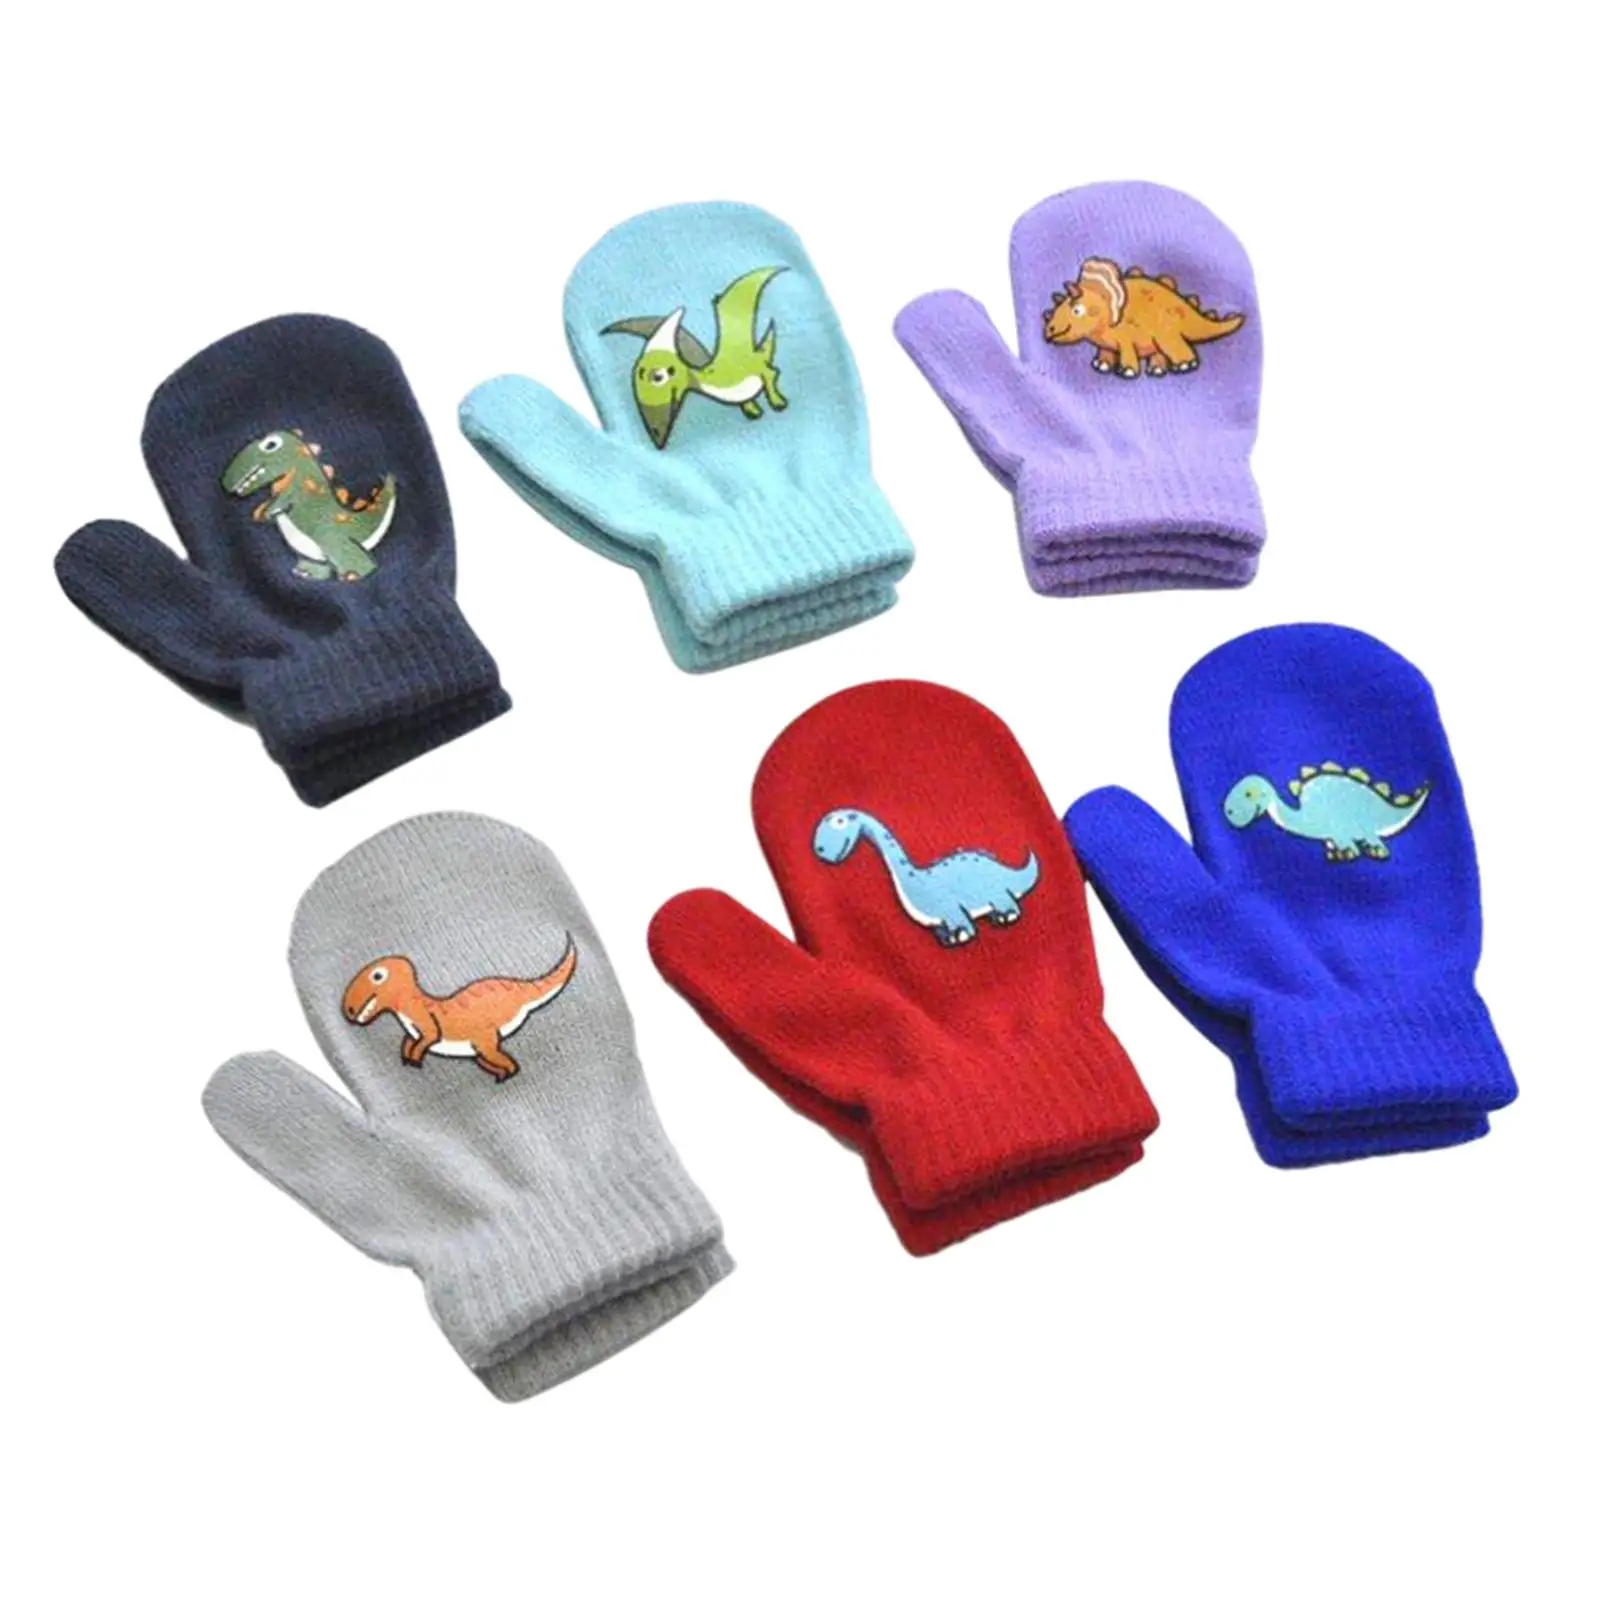 6 Pairs Kids Winter Gloves Stretch Knitted for Indoor and Outdoor Activities